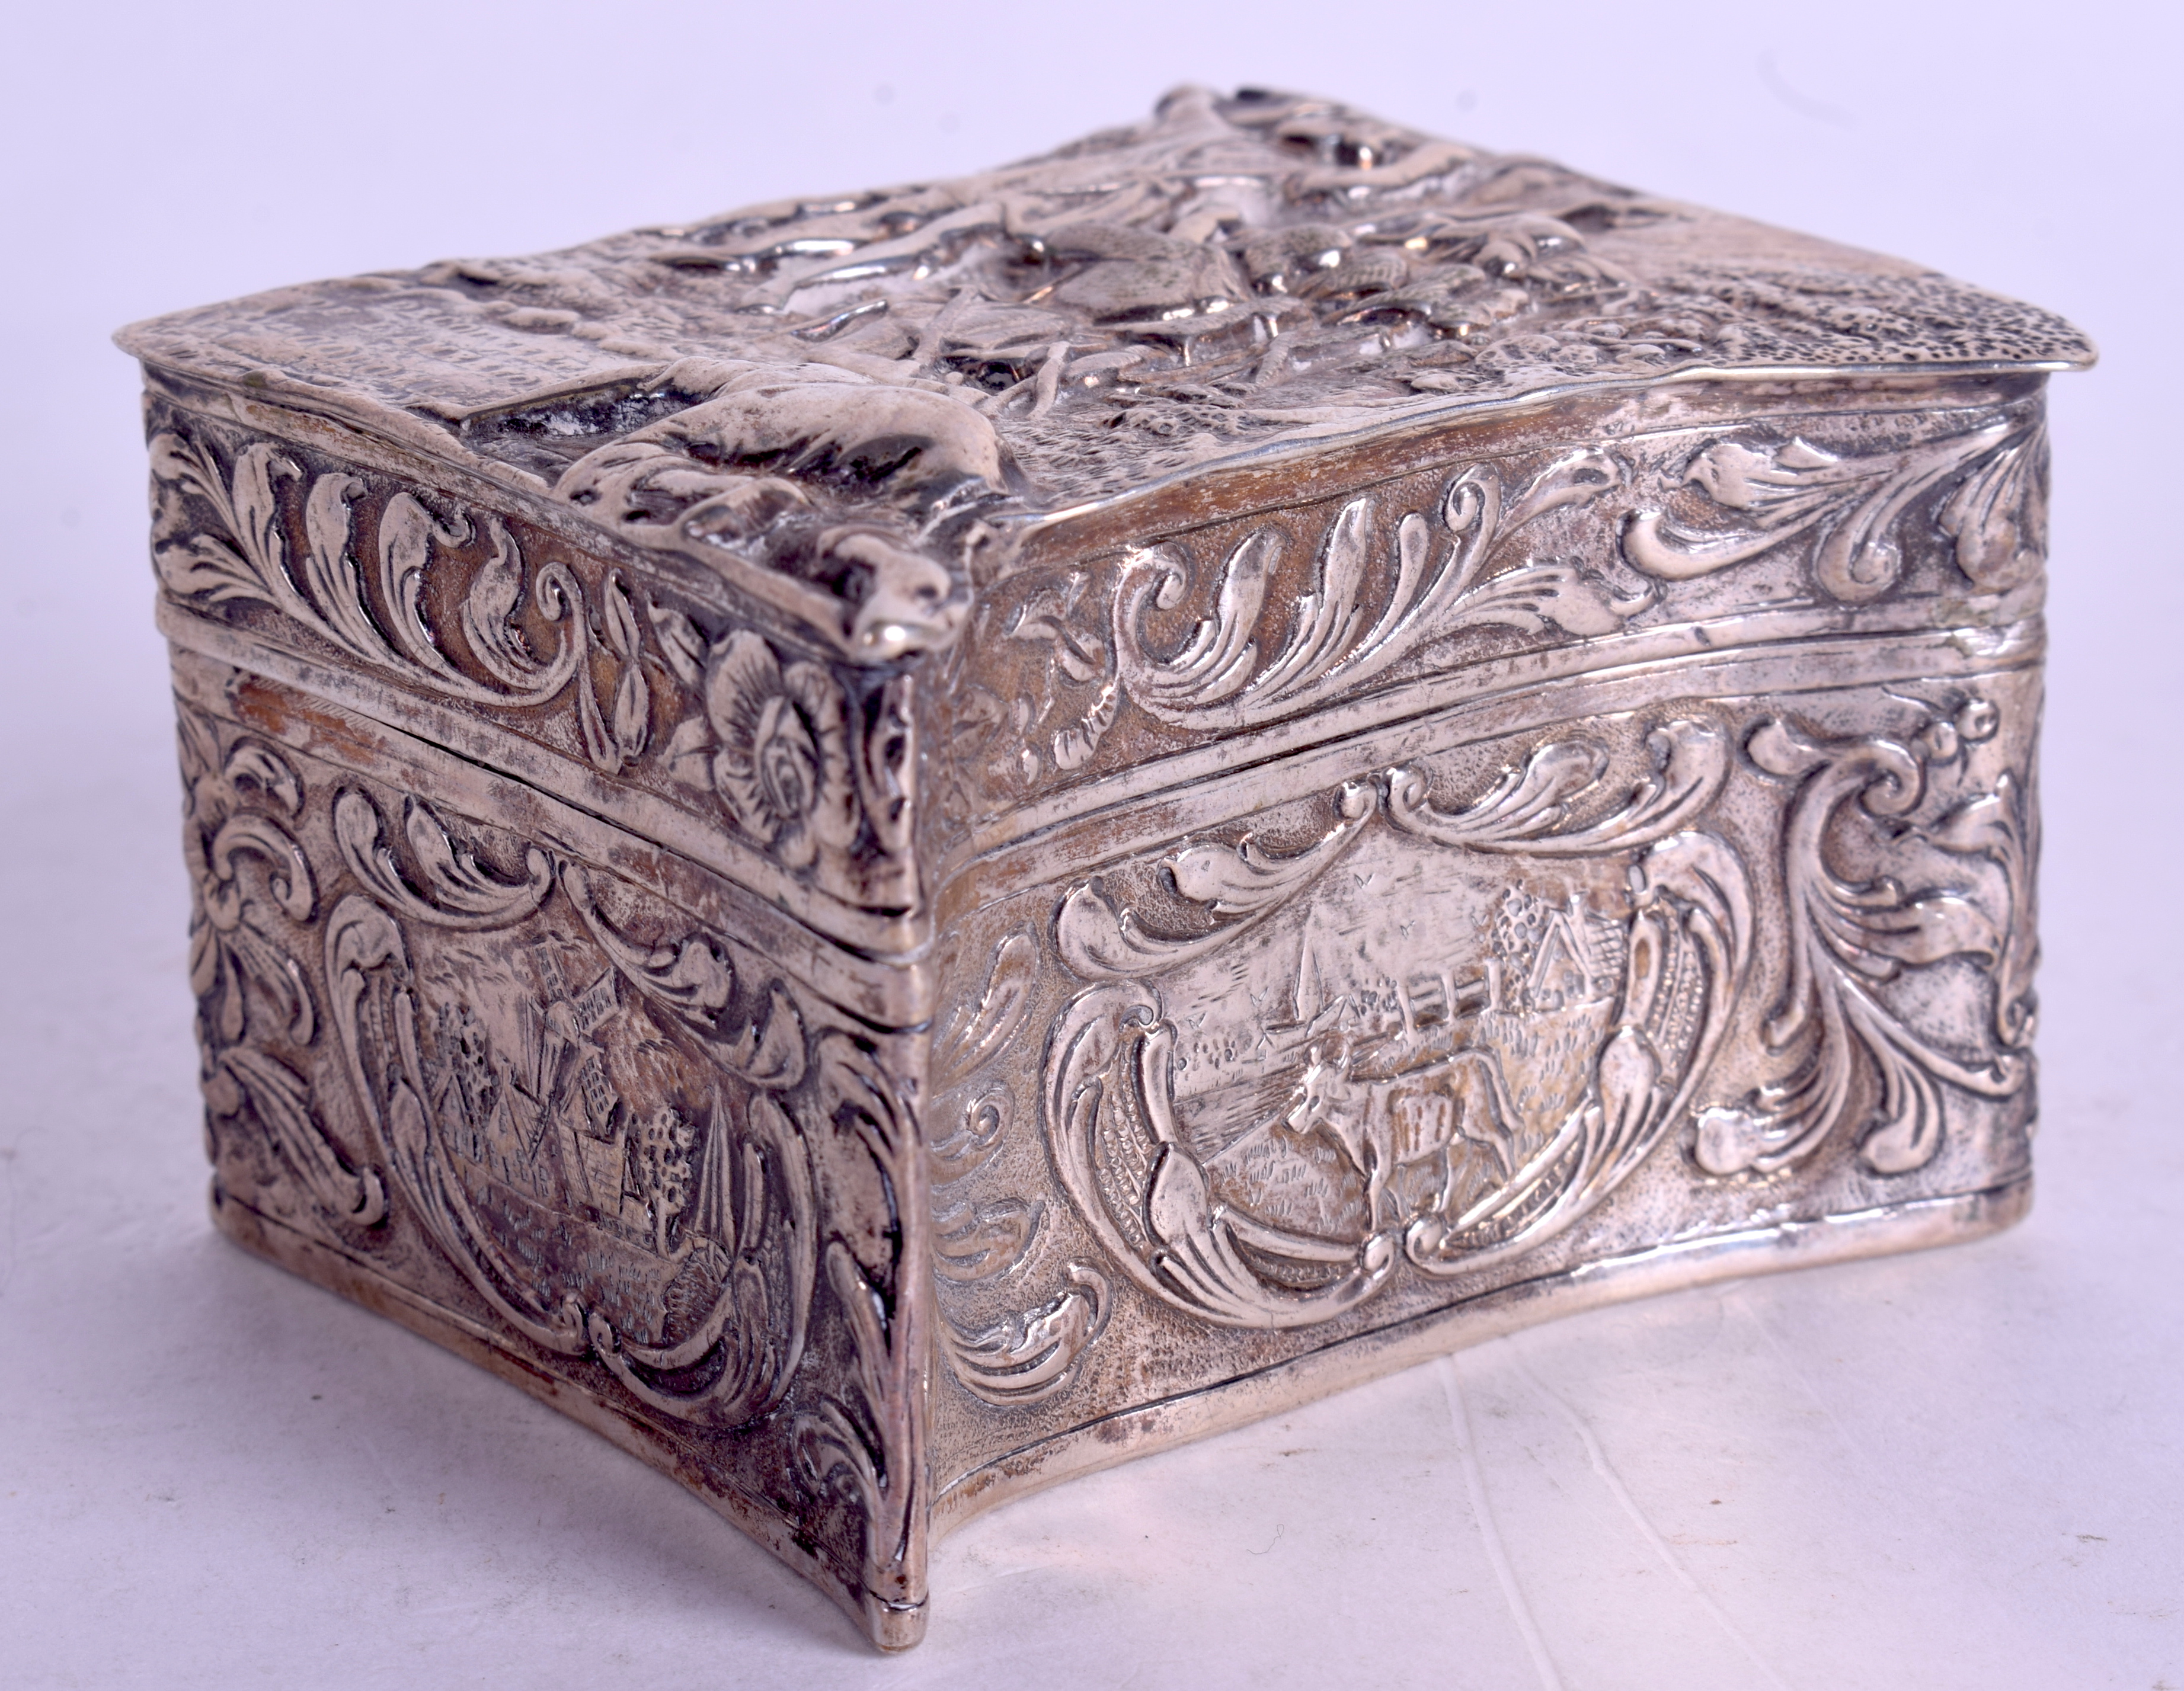 A RARE ANTIQUE CONTINENTAL SILVER BOX decorated with figures and landscapes. 5.1 oz. 7.5 cm x 6.5 c